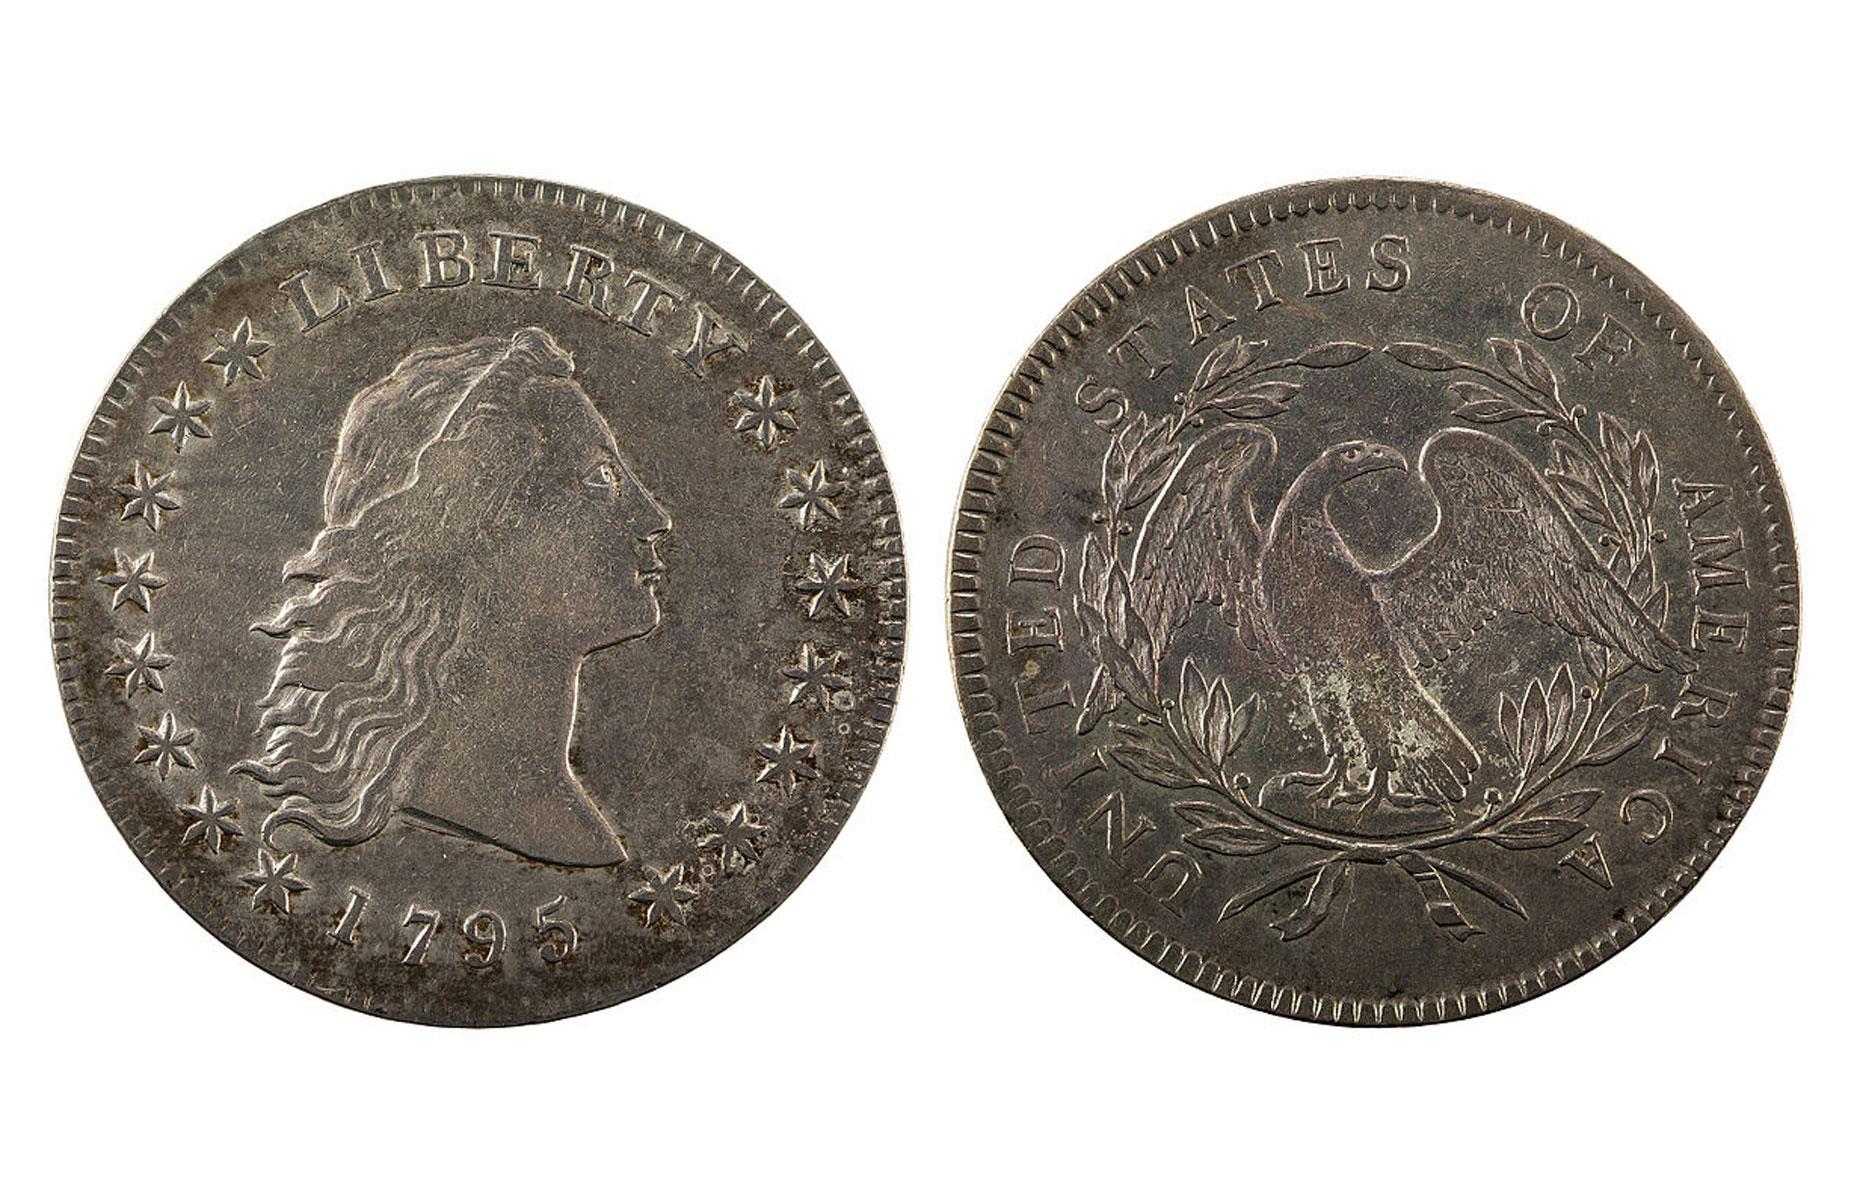 Early coins